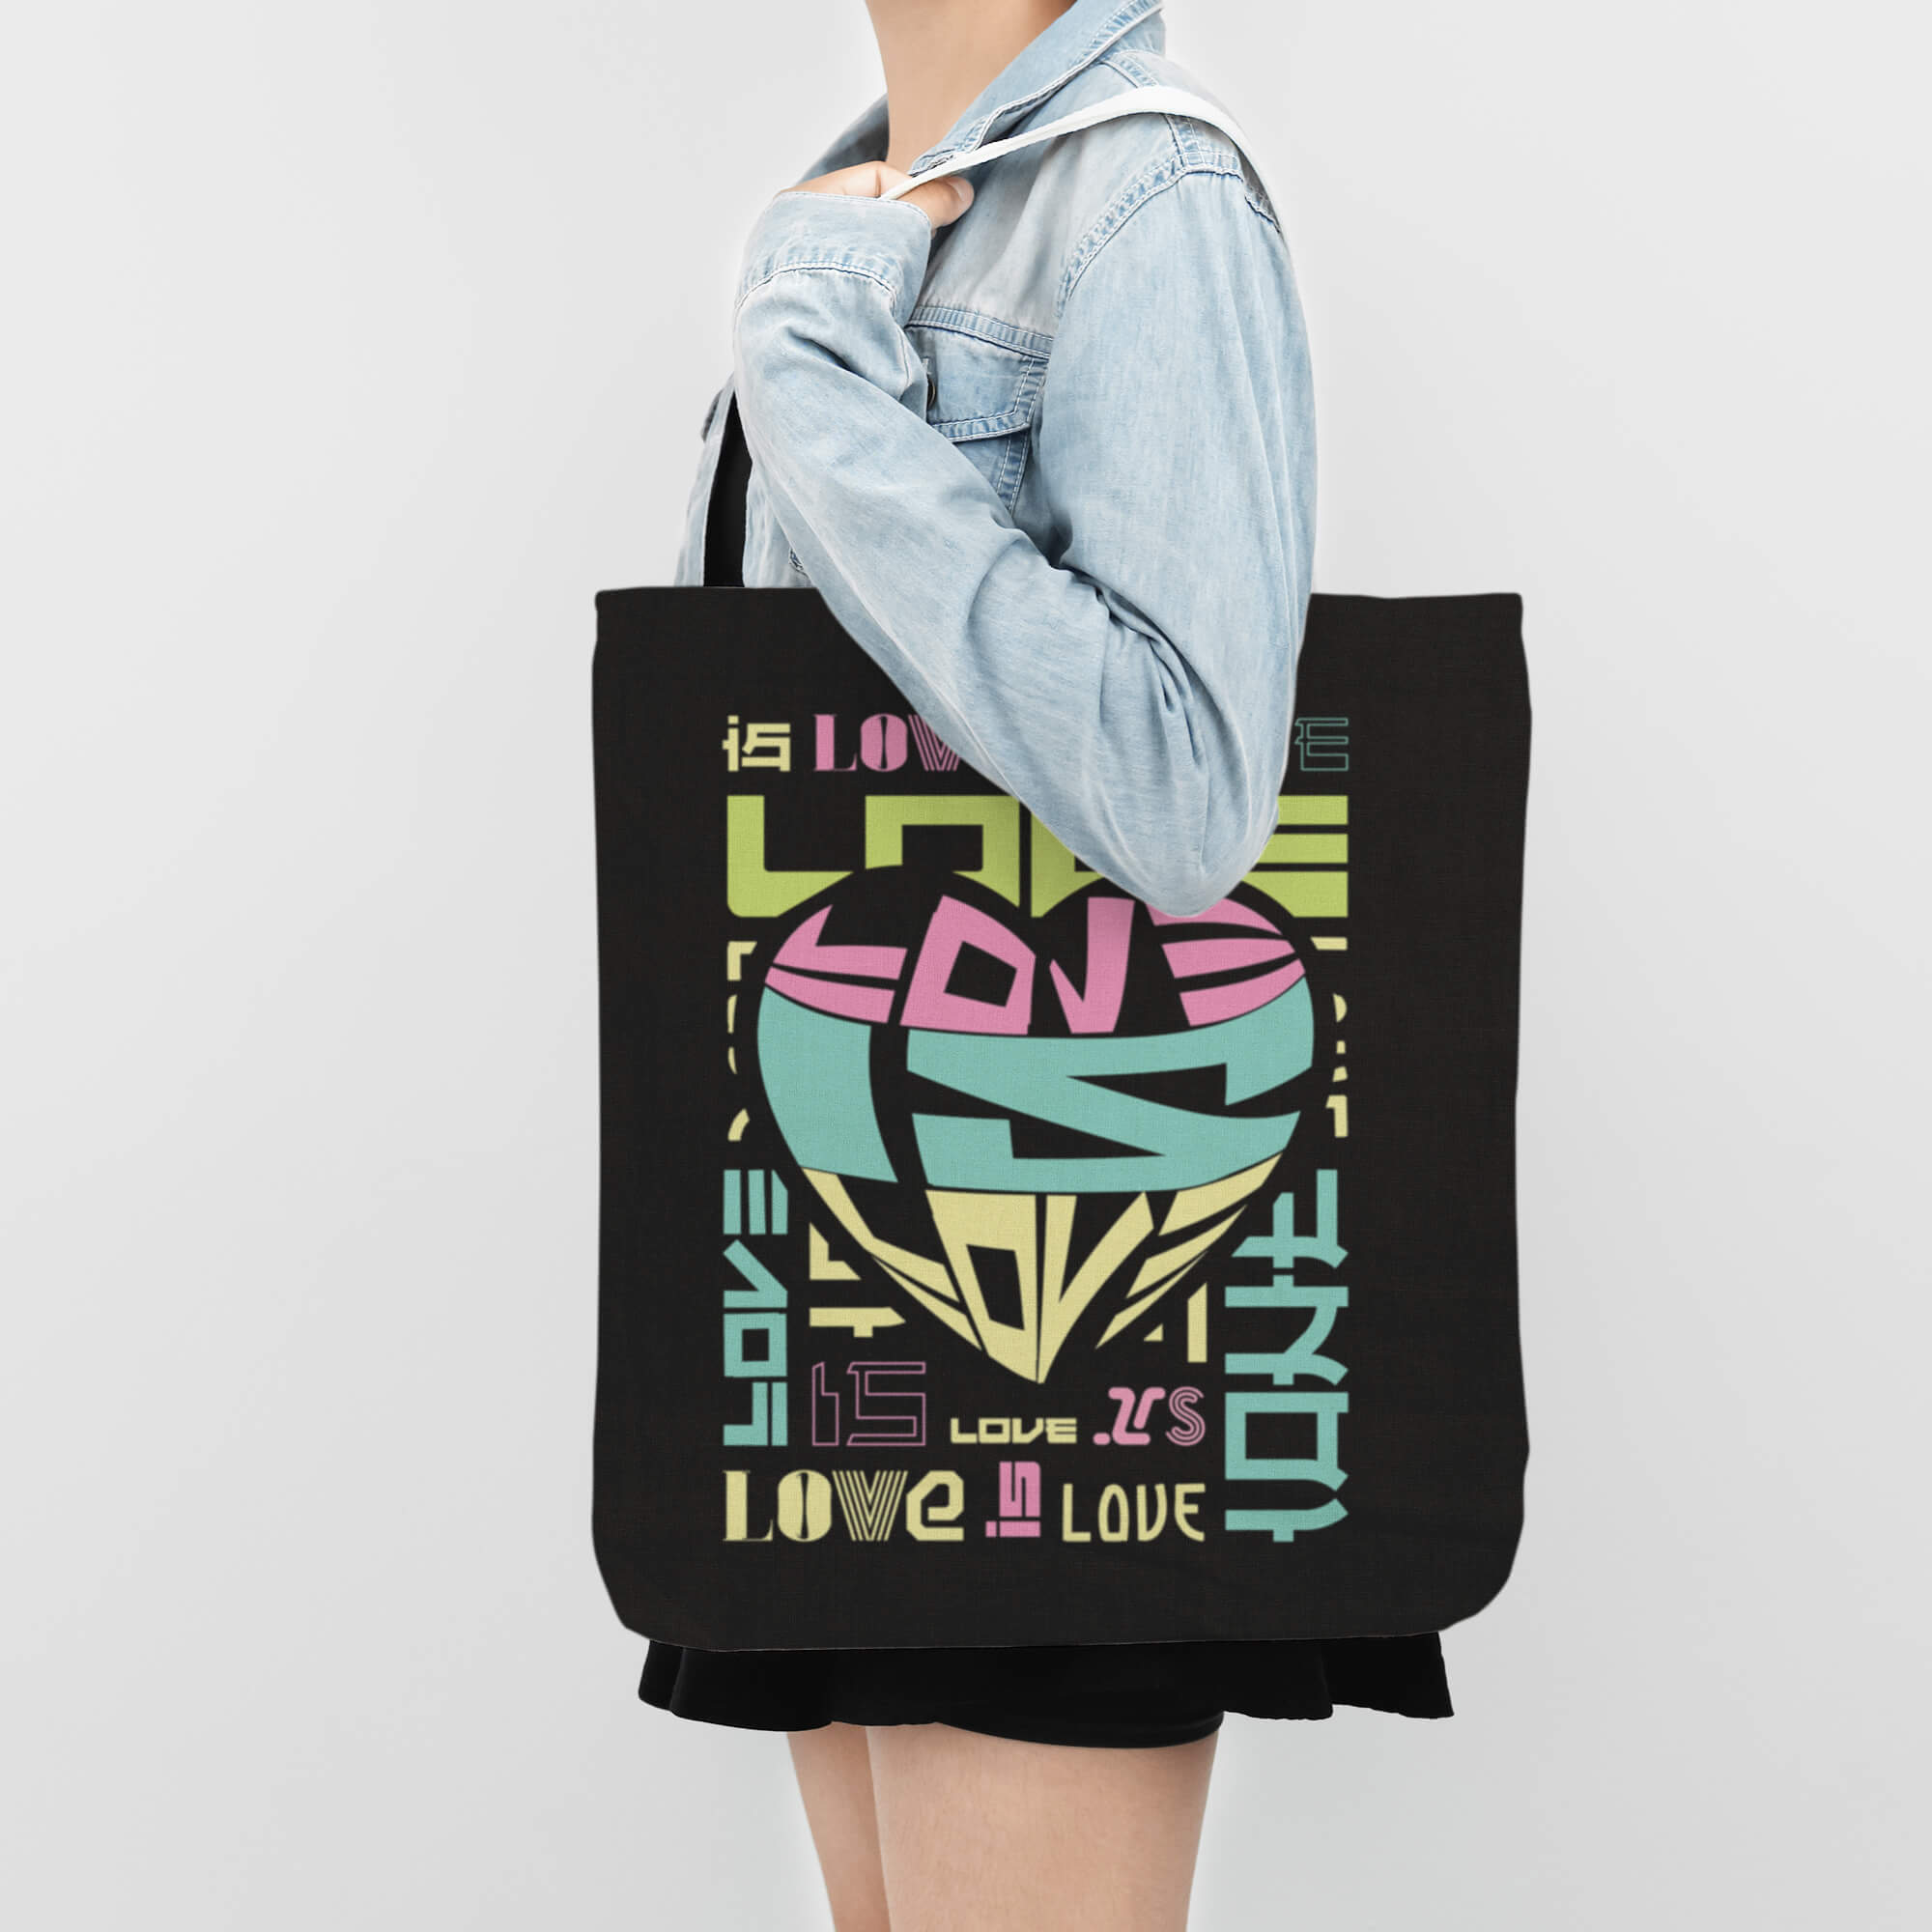 Love Is Love Marriage Equality Tote